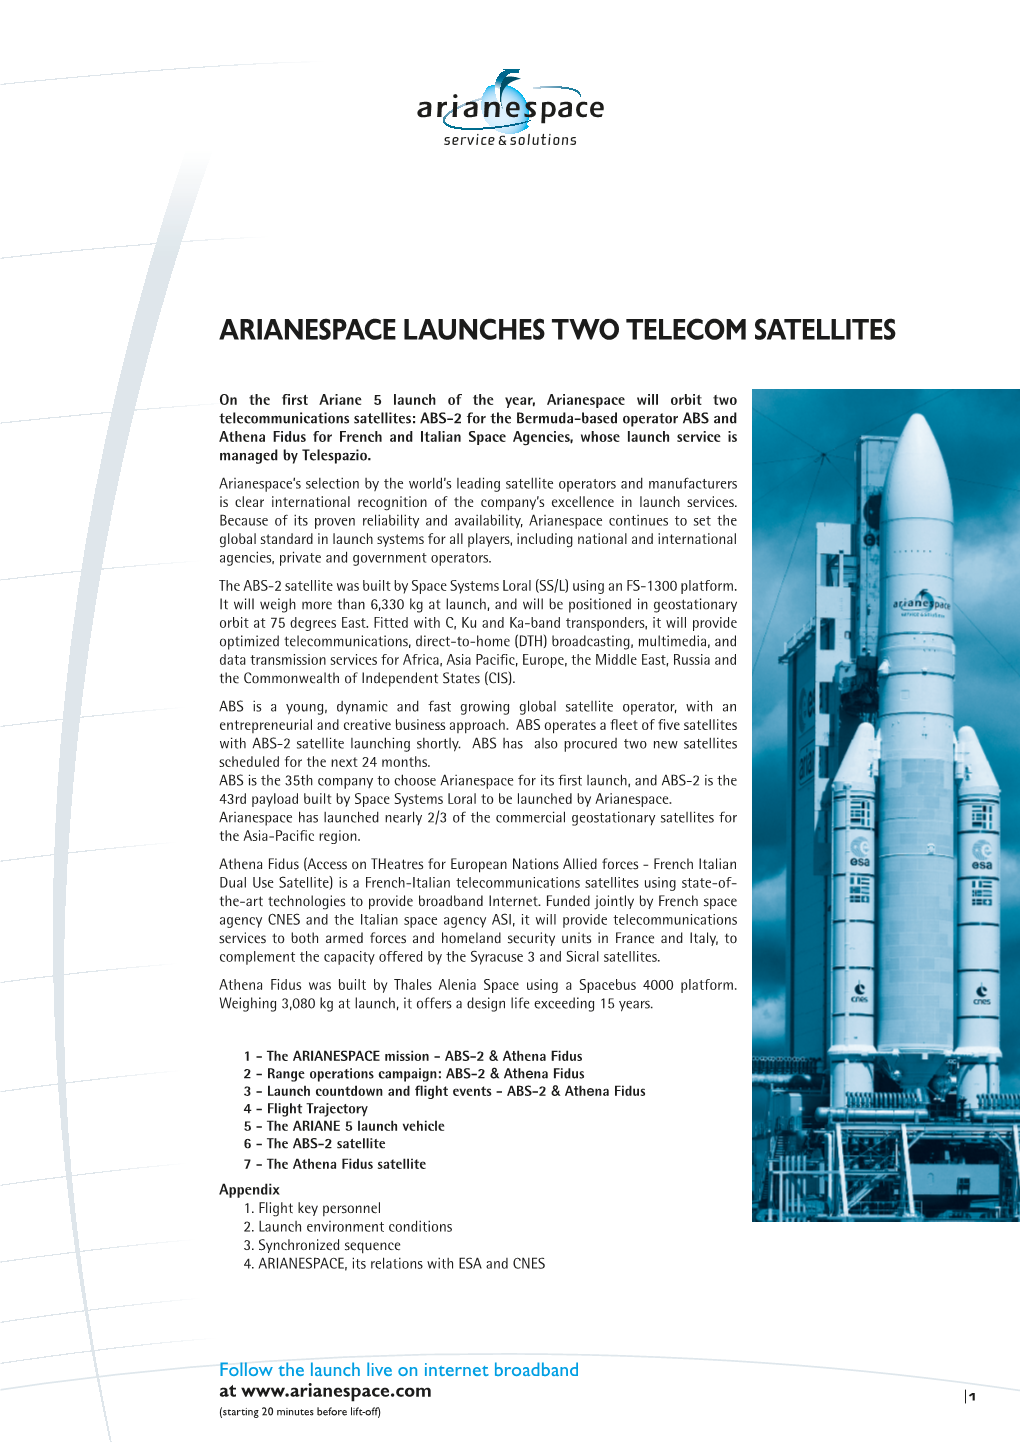 Arianespace Launches Two Telecom Satellites